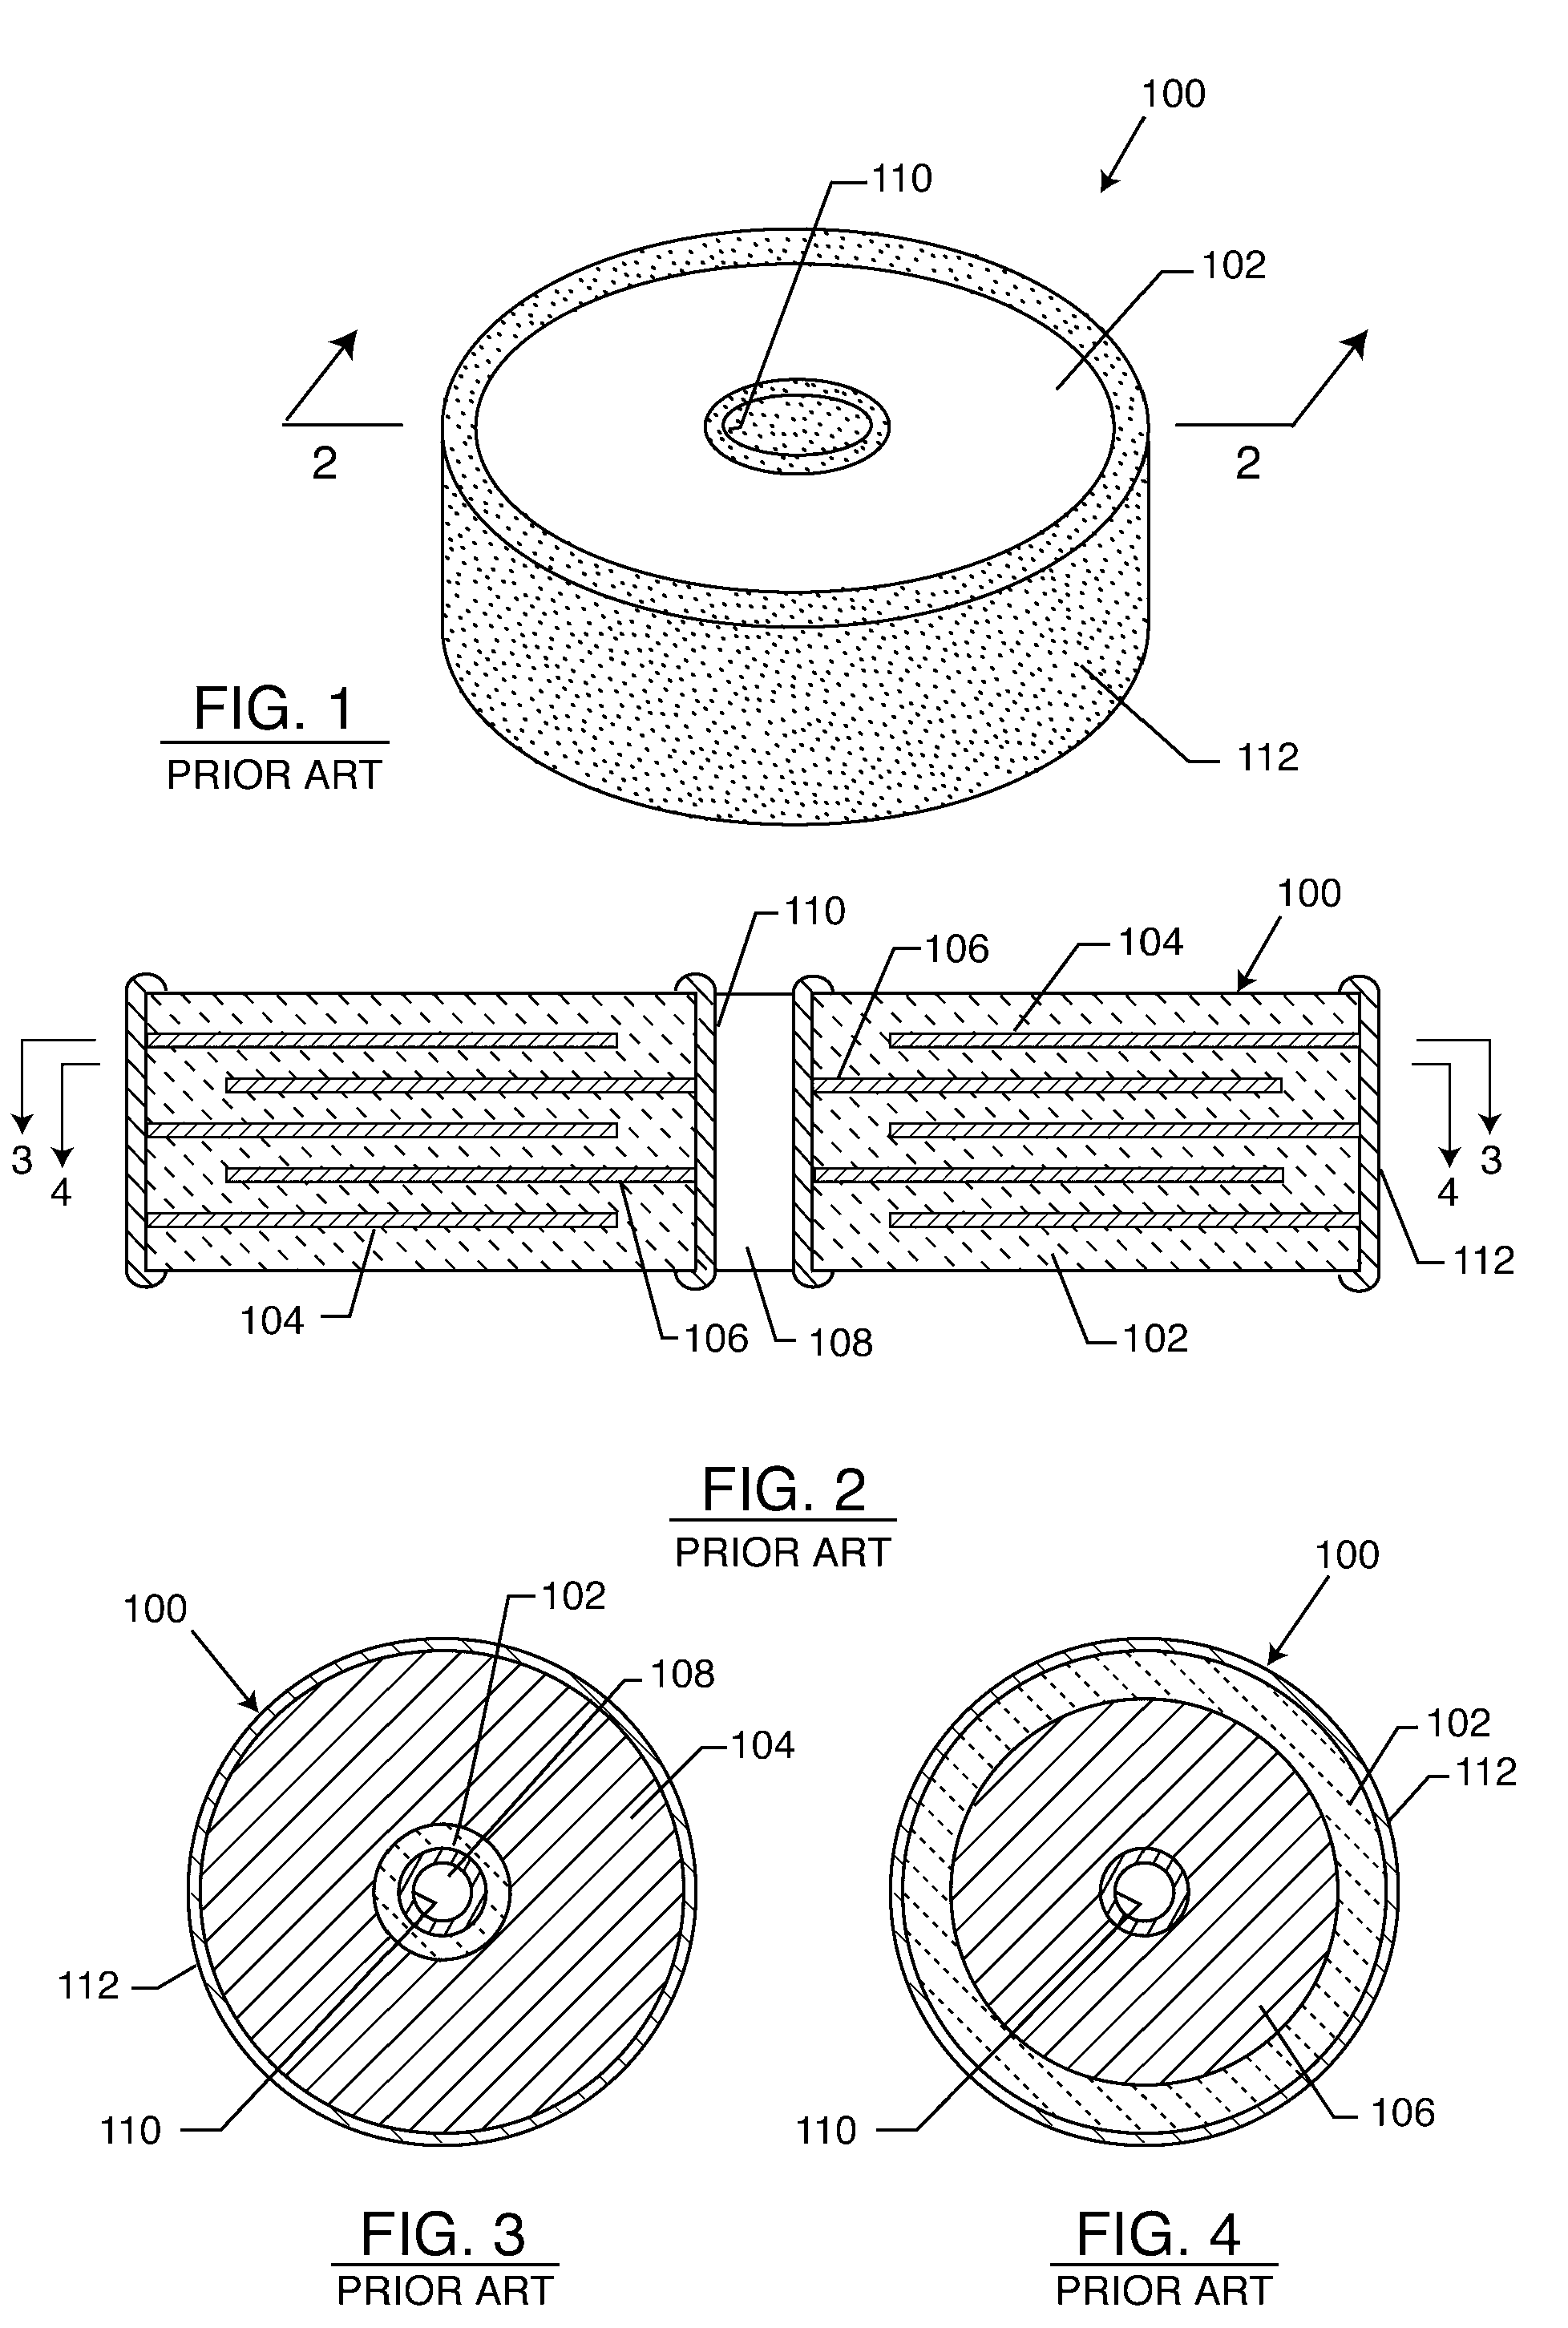 Spring contact system for EMI filtered hermetic seals for active implantable medical devices